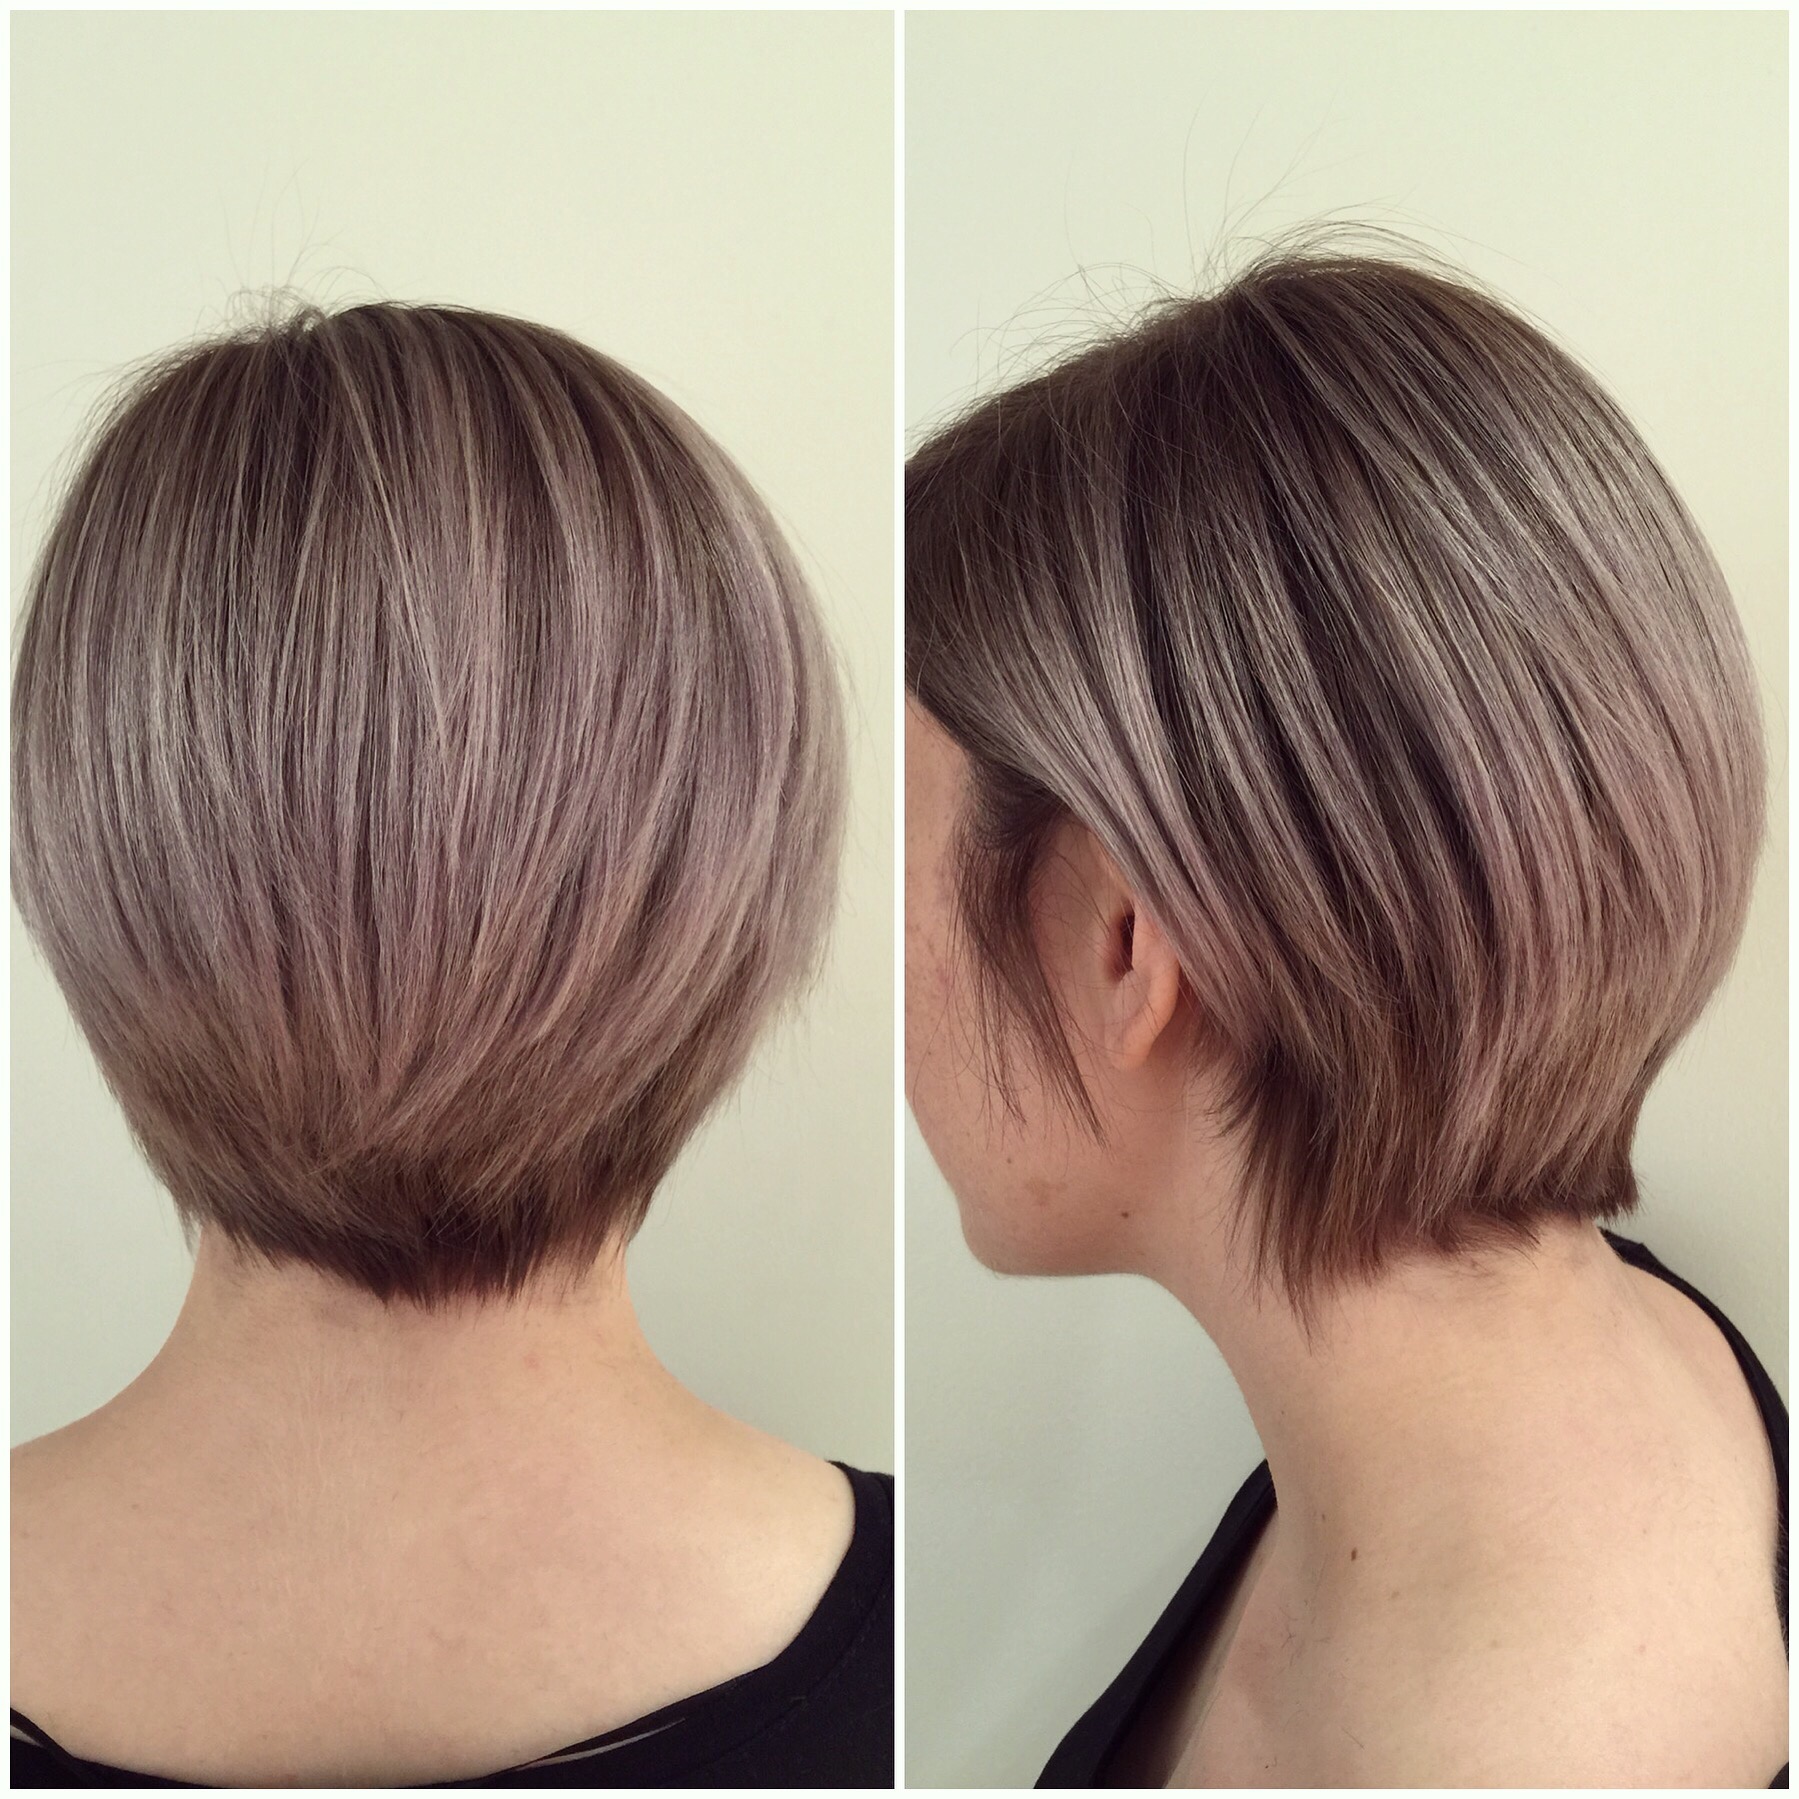 Cut and color